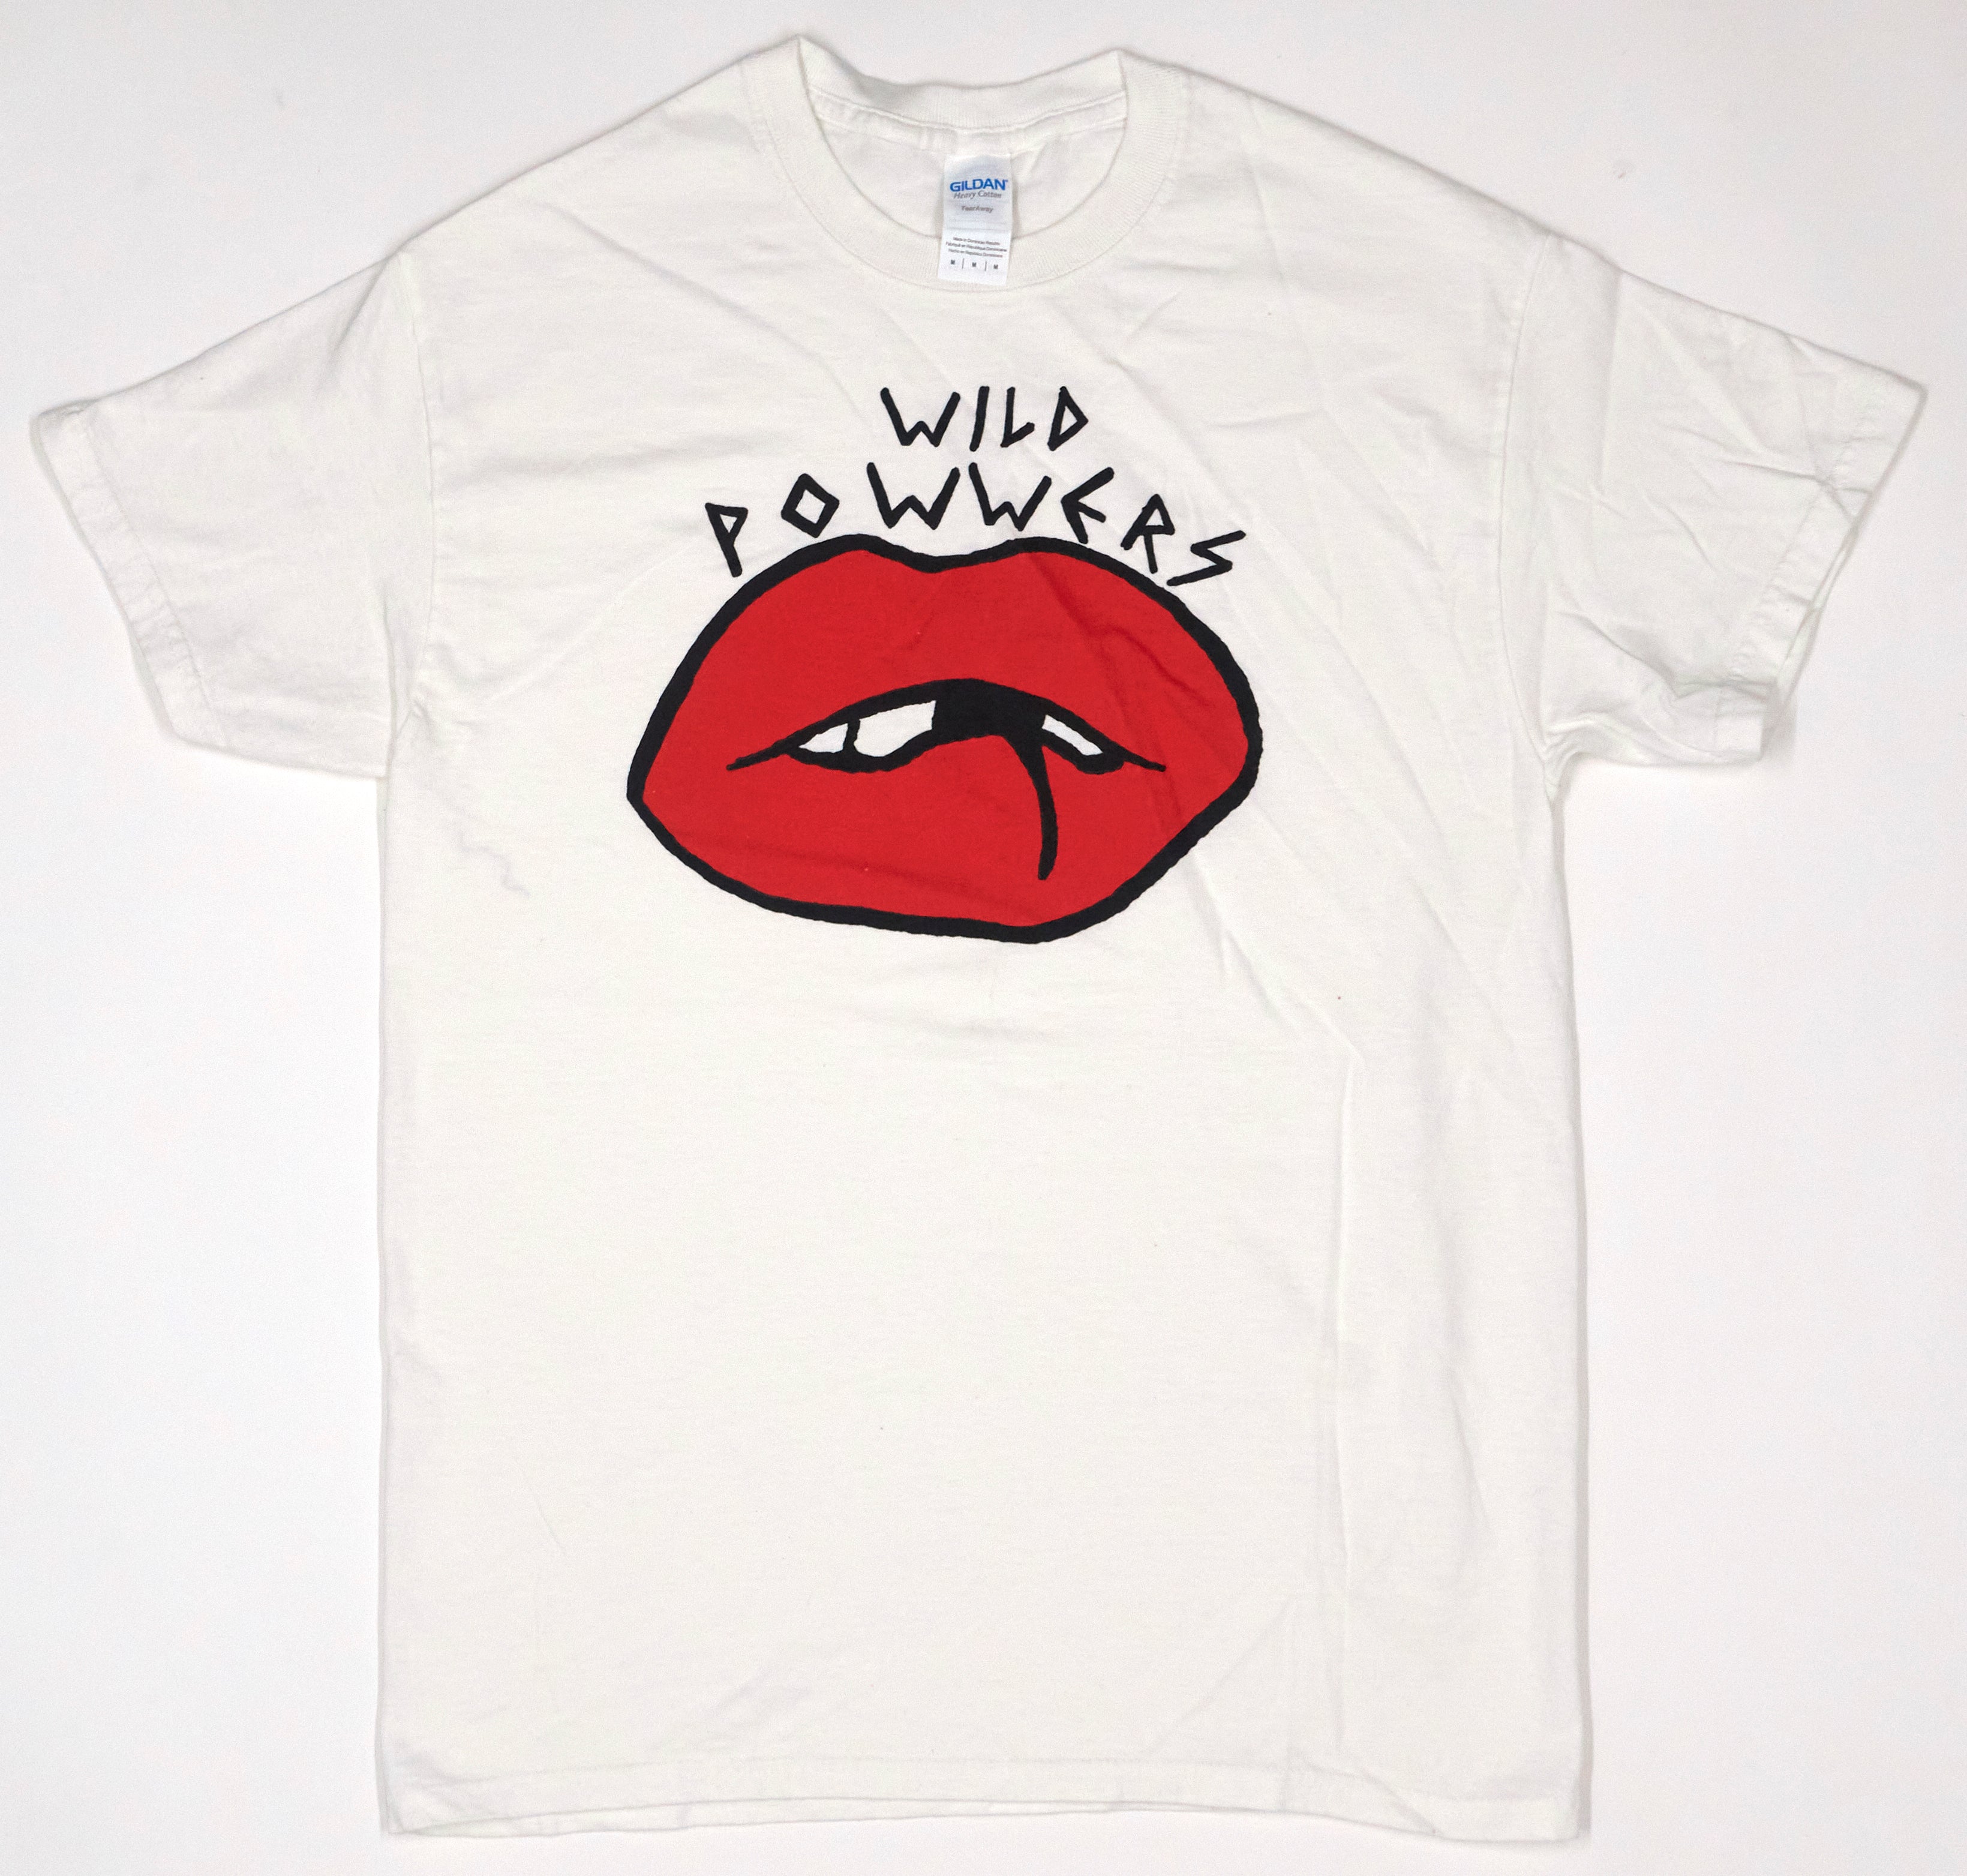 Wild Powwers – Busted lips / What You Wanted 2021 Tour Shirt Size Medium